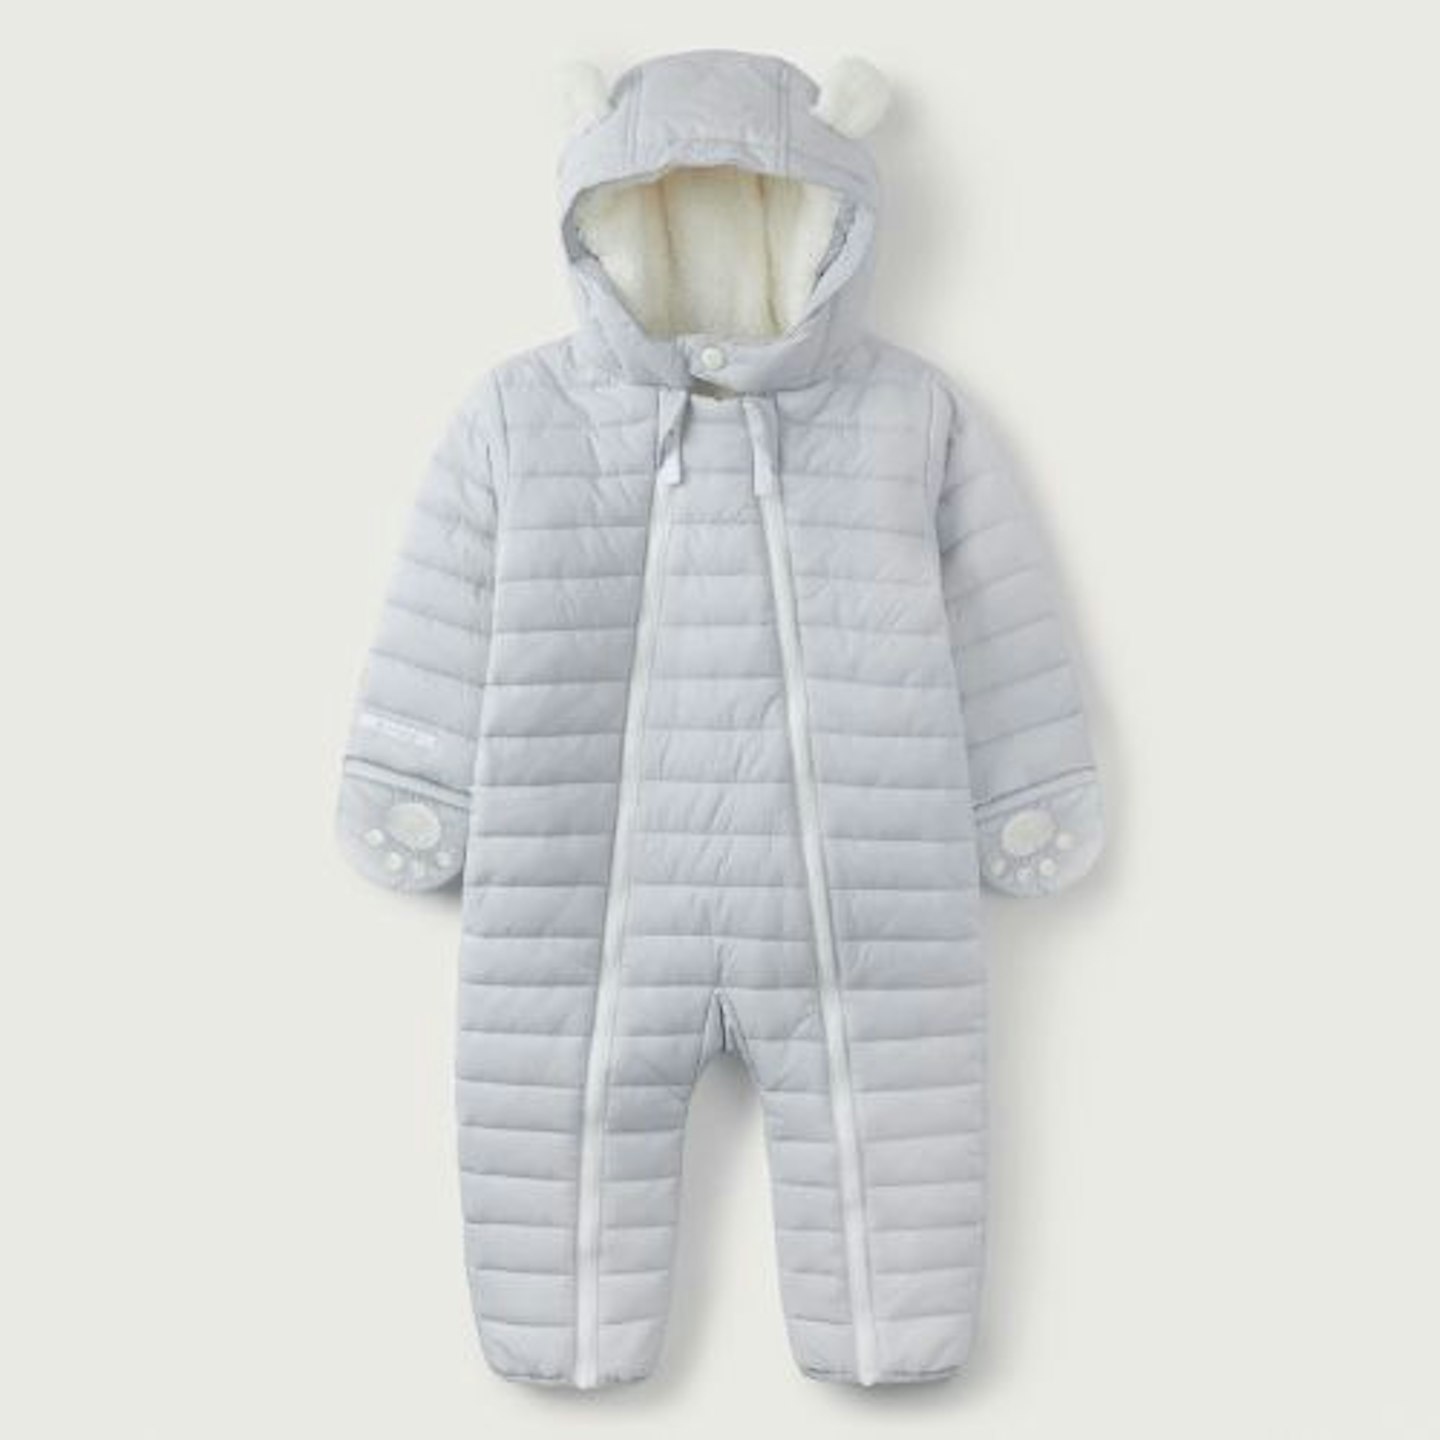 Grey Quilted Pramsuit